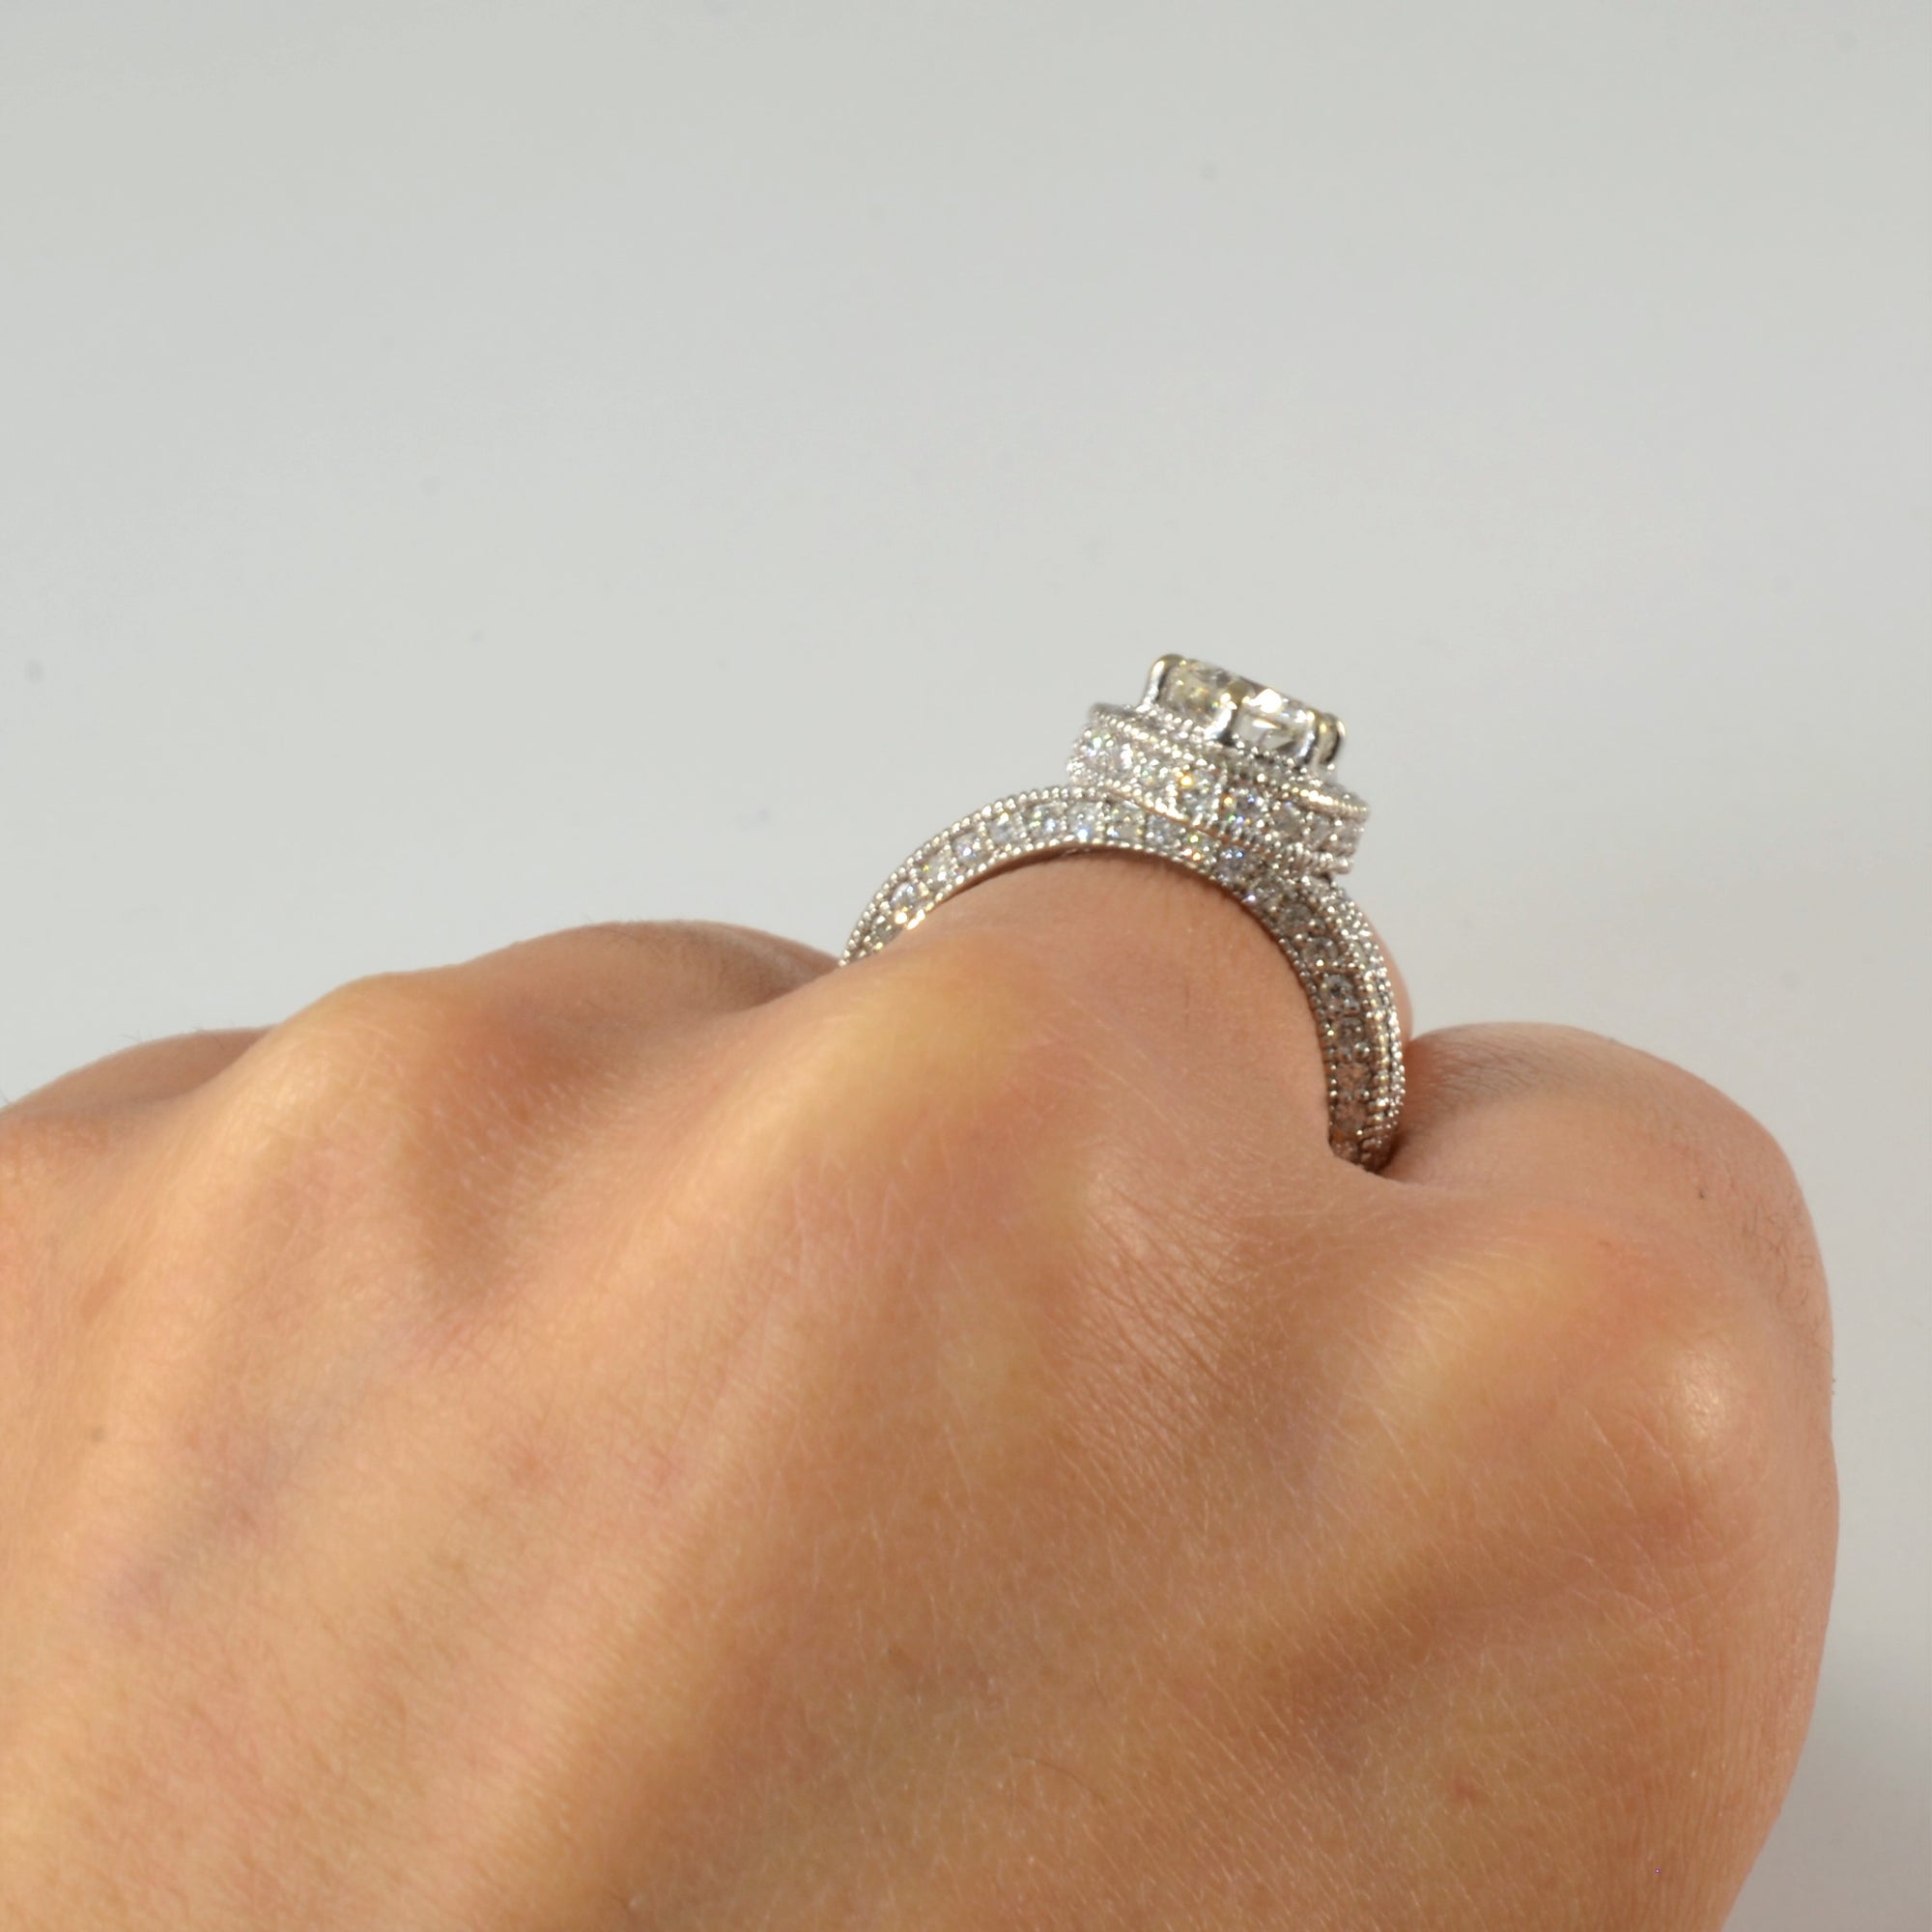 Halo diamond engagement ring, vintage diamond engagement ring, antique rings for sale